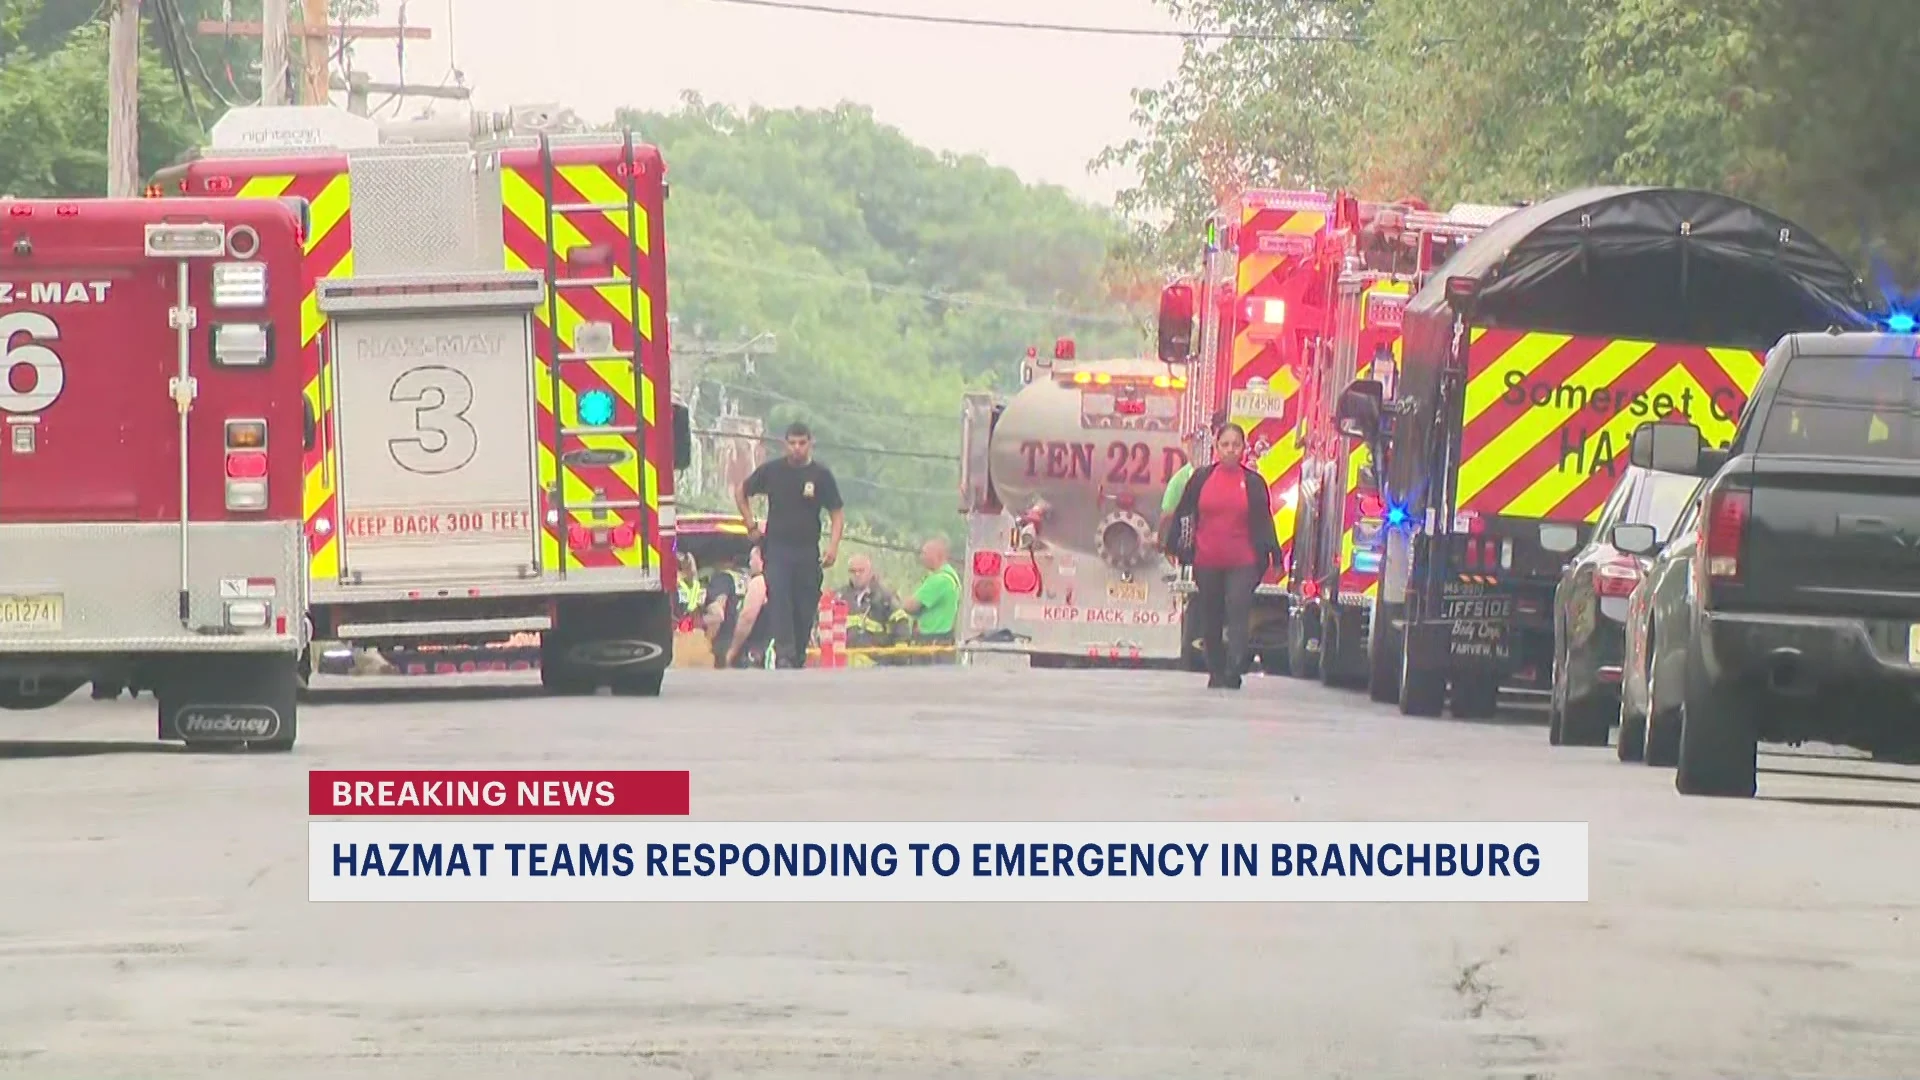 Police: 2 people hospitalized following reports of explosion in Branchburg